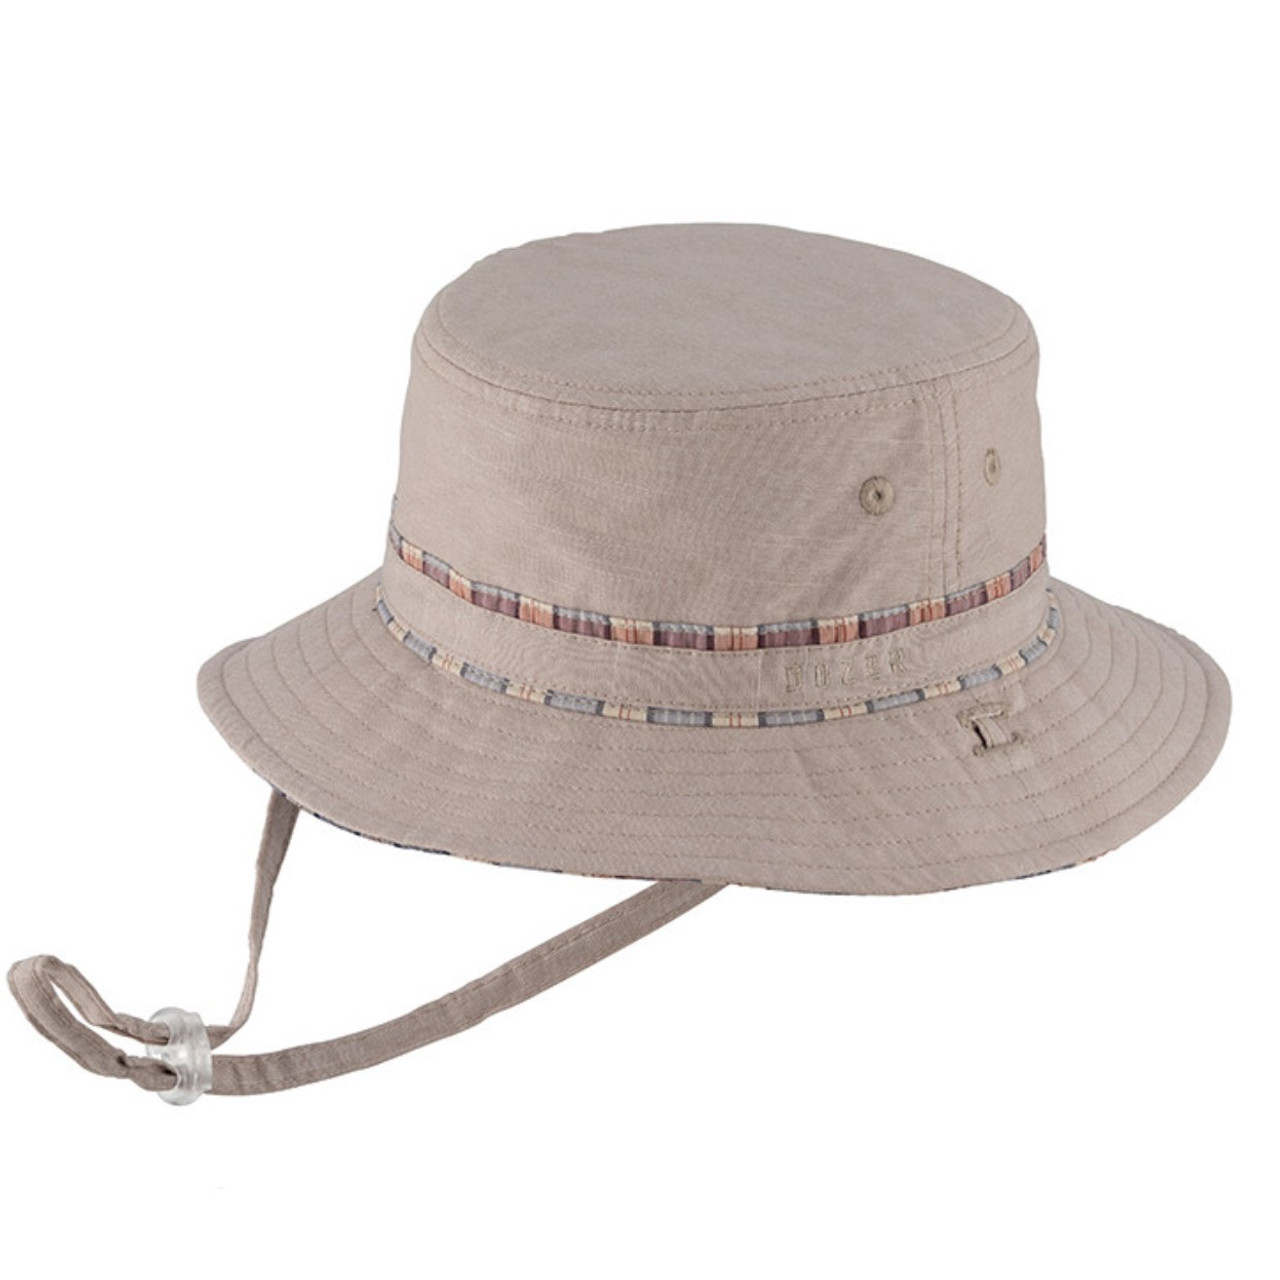 Milly Mook Hats Boys Bucket Harry Natural